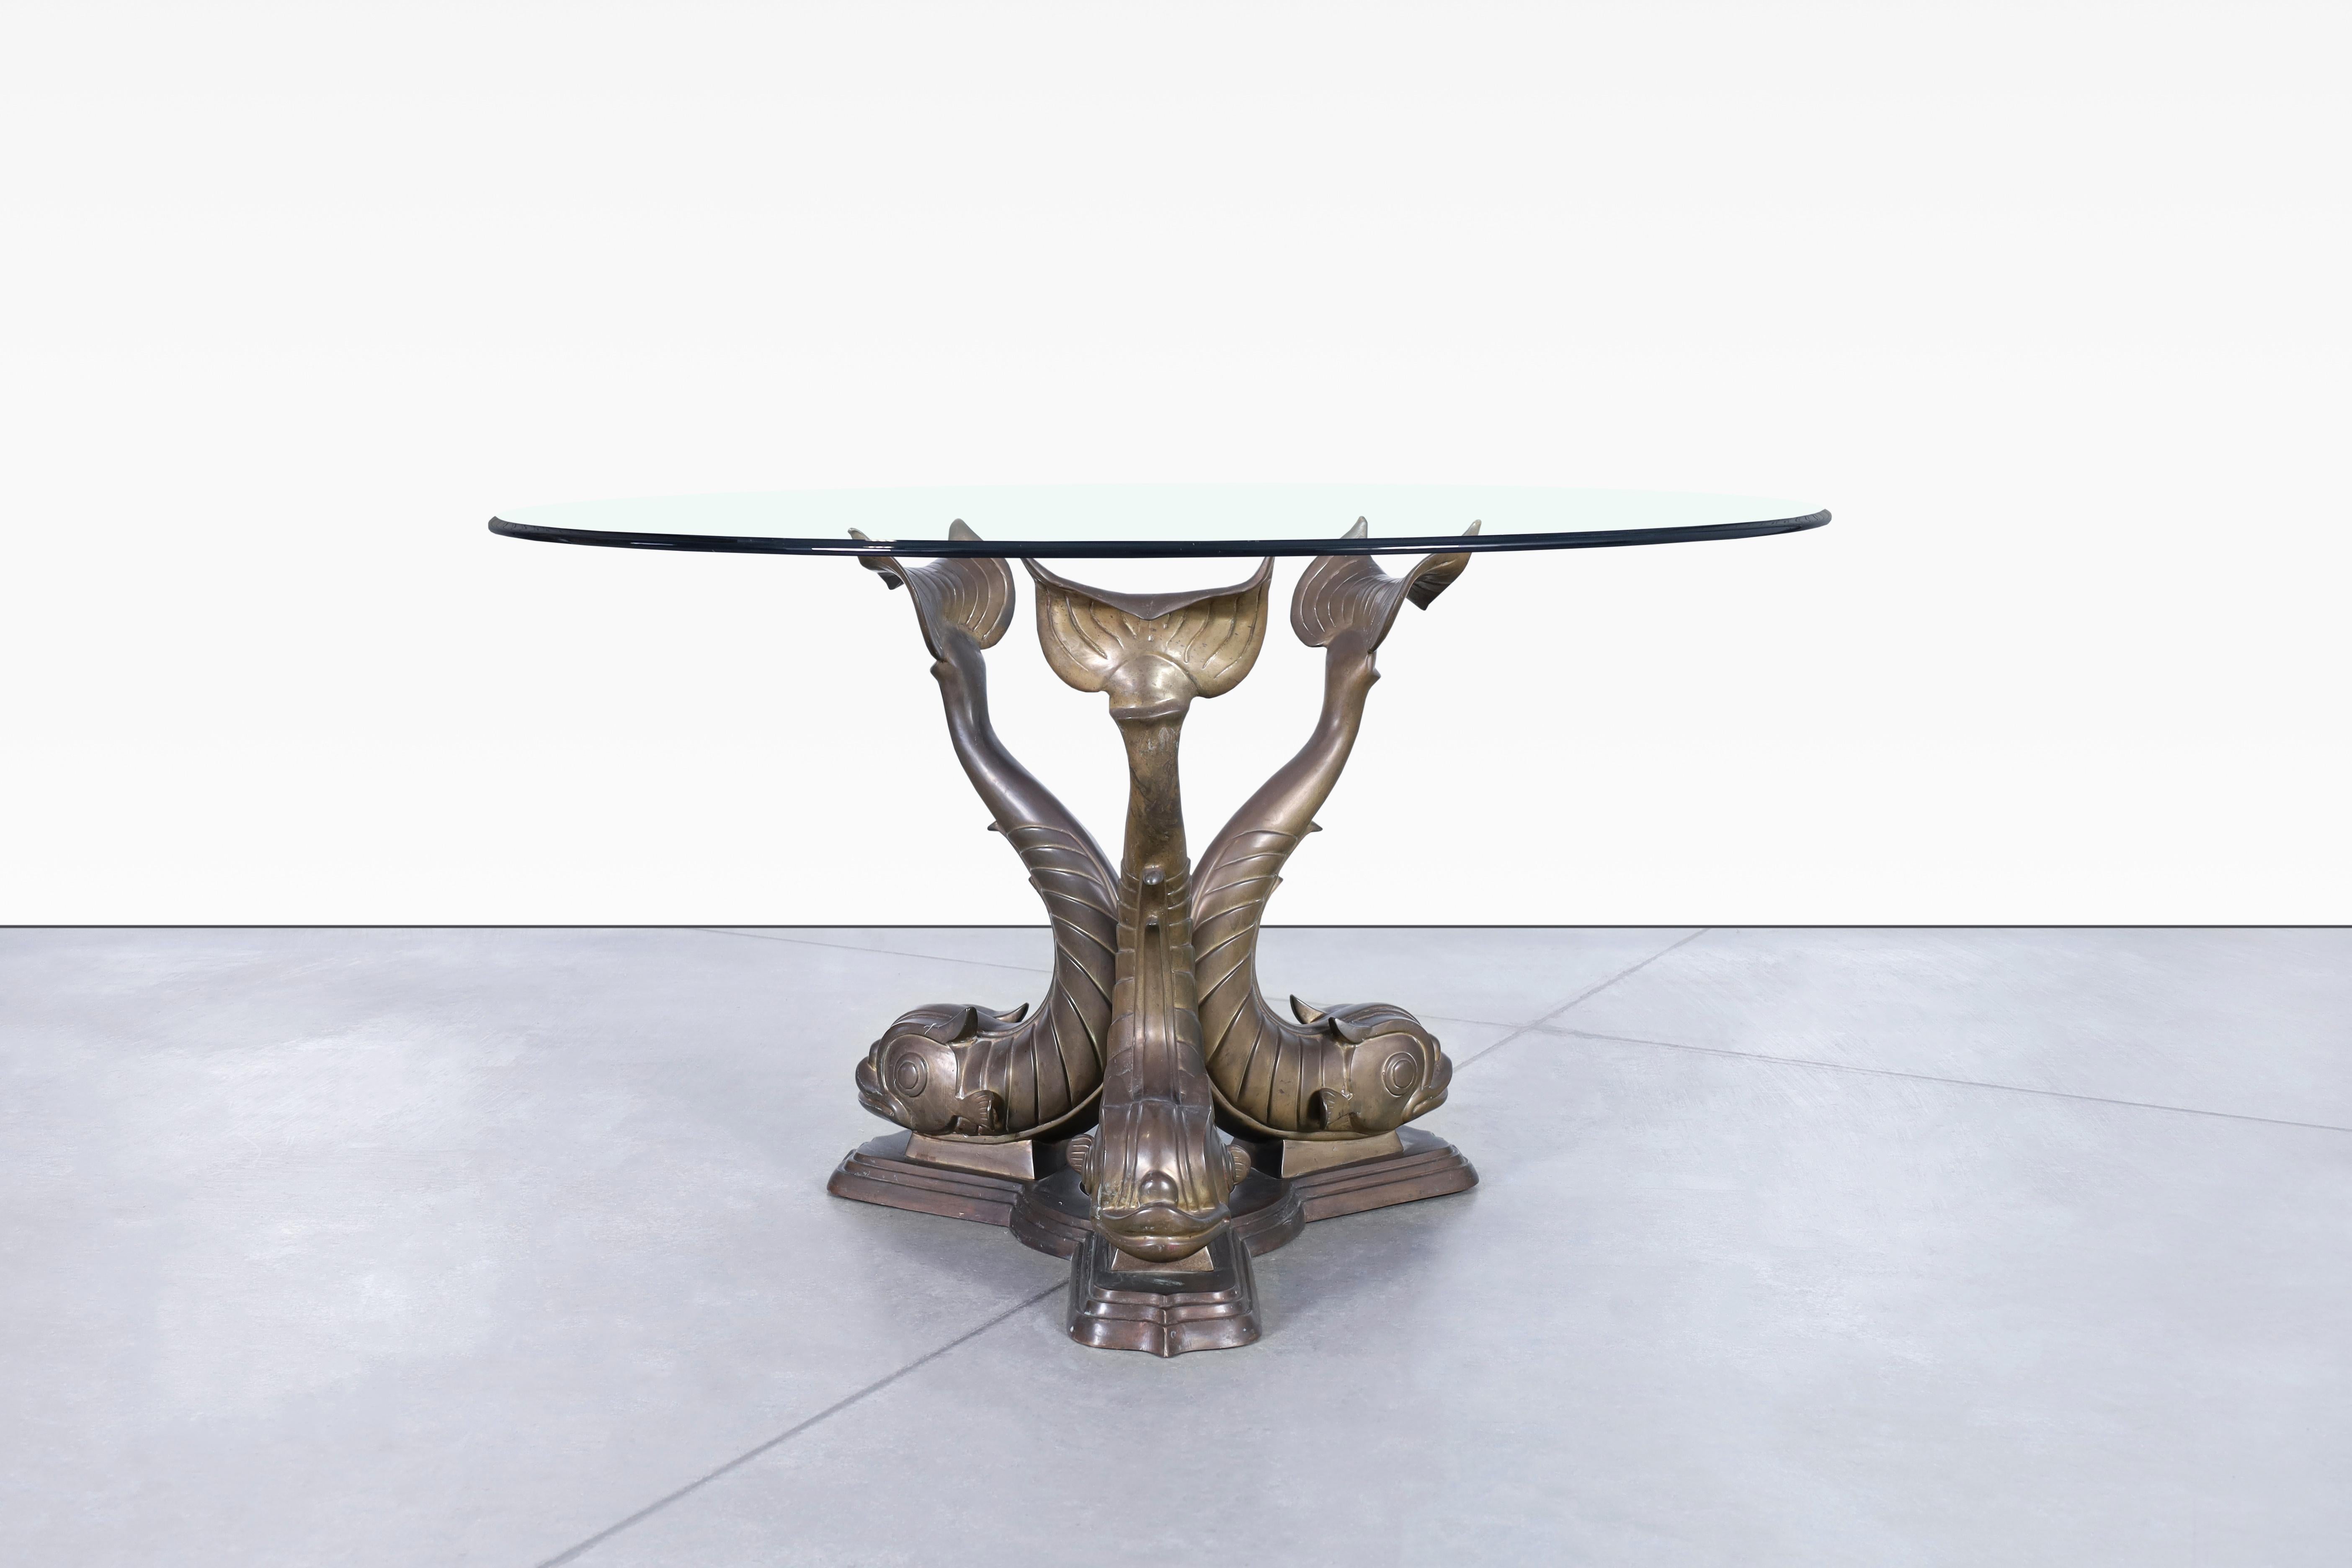 Vintage bronze koi fish dining table designed in Italy, circa 1970s. Feast your eyes on this exquisite table that showcase a sturdy bronze base sculpted beautifully in a koi fish design. The intricacy of the detailing on each koi fish sculpture is